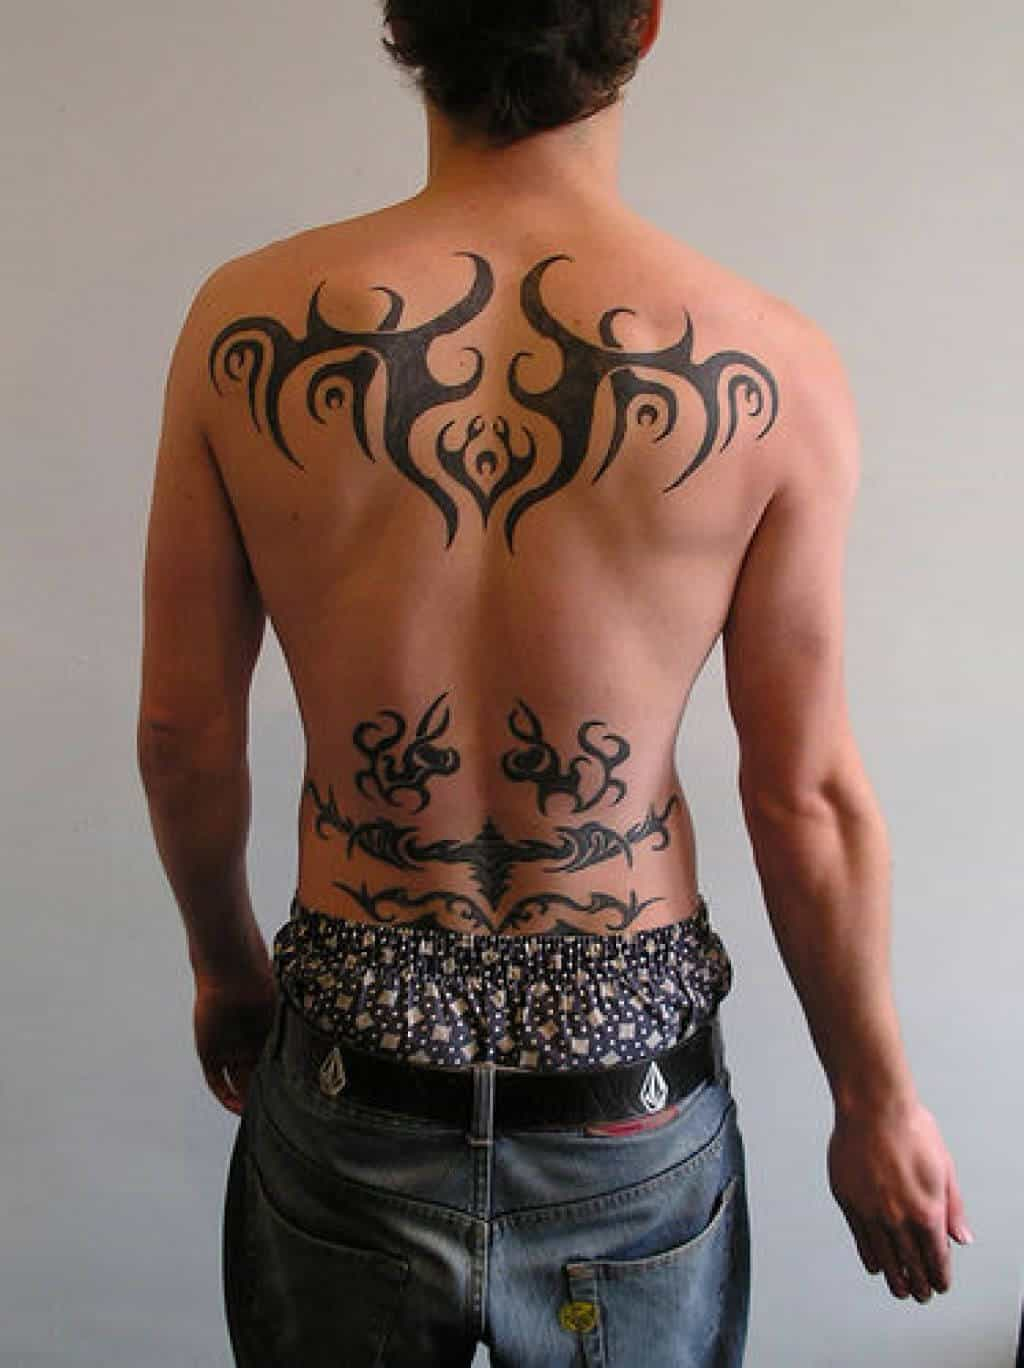 Lower Back Tattoos For Men Ideas And Designs For Guys intended for measurements 1024 X 1368